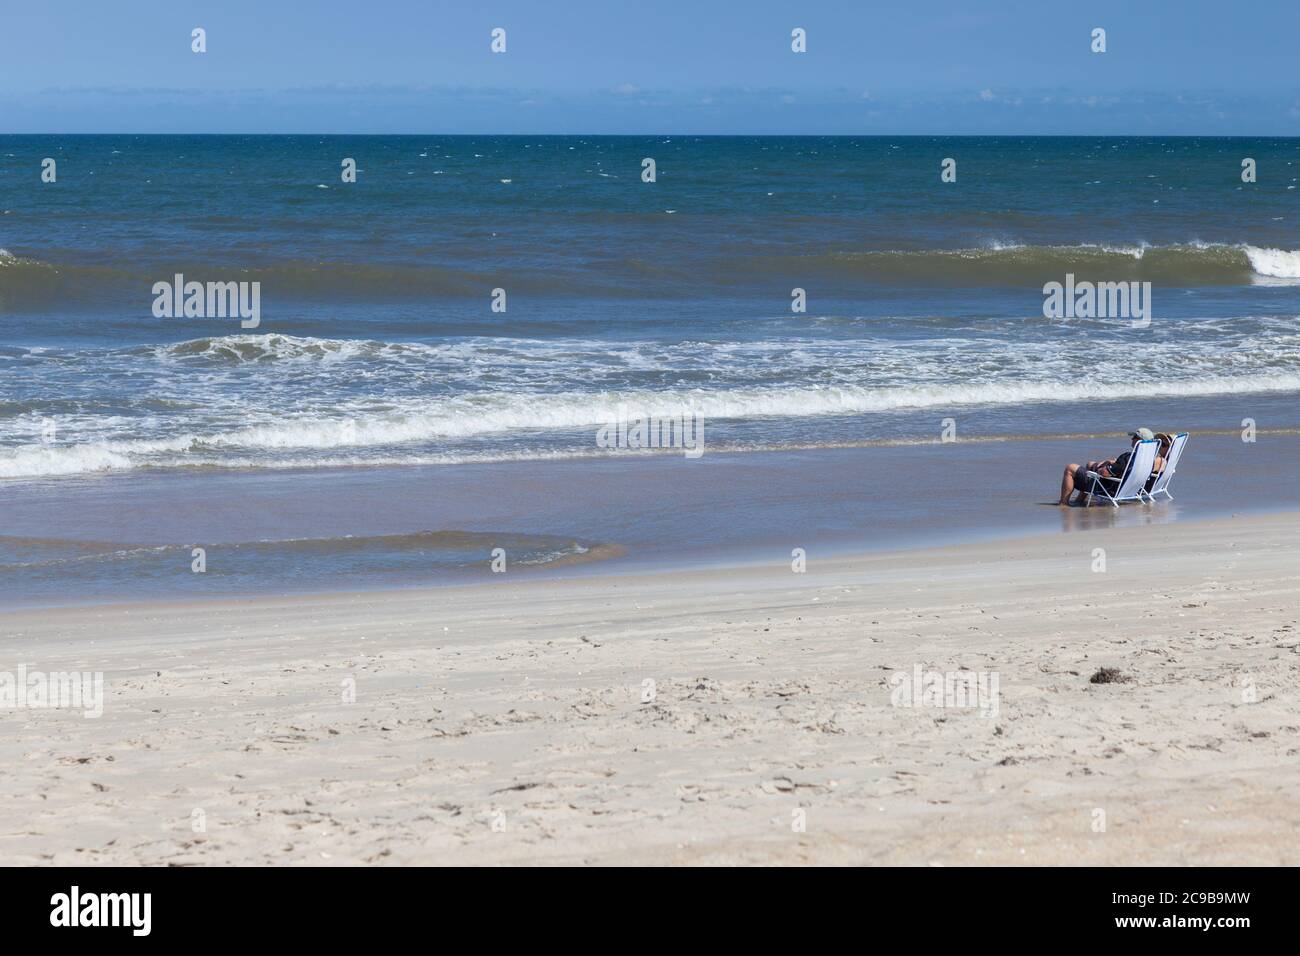 Avon, Outer Banks, North Carolina. Middle-aged Couple Enjoying the Waves on the Beach. Stock Photo